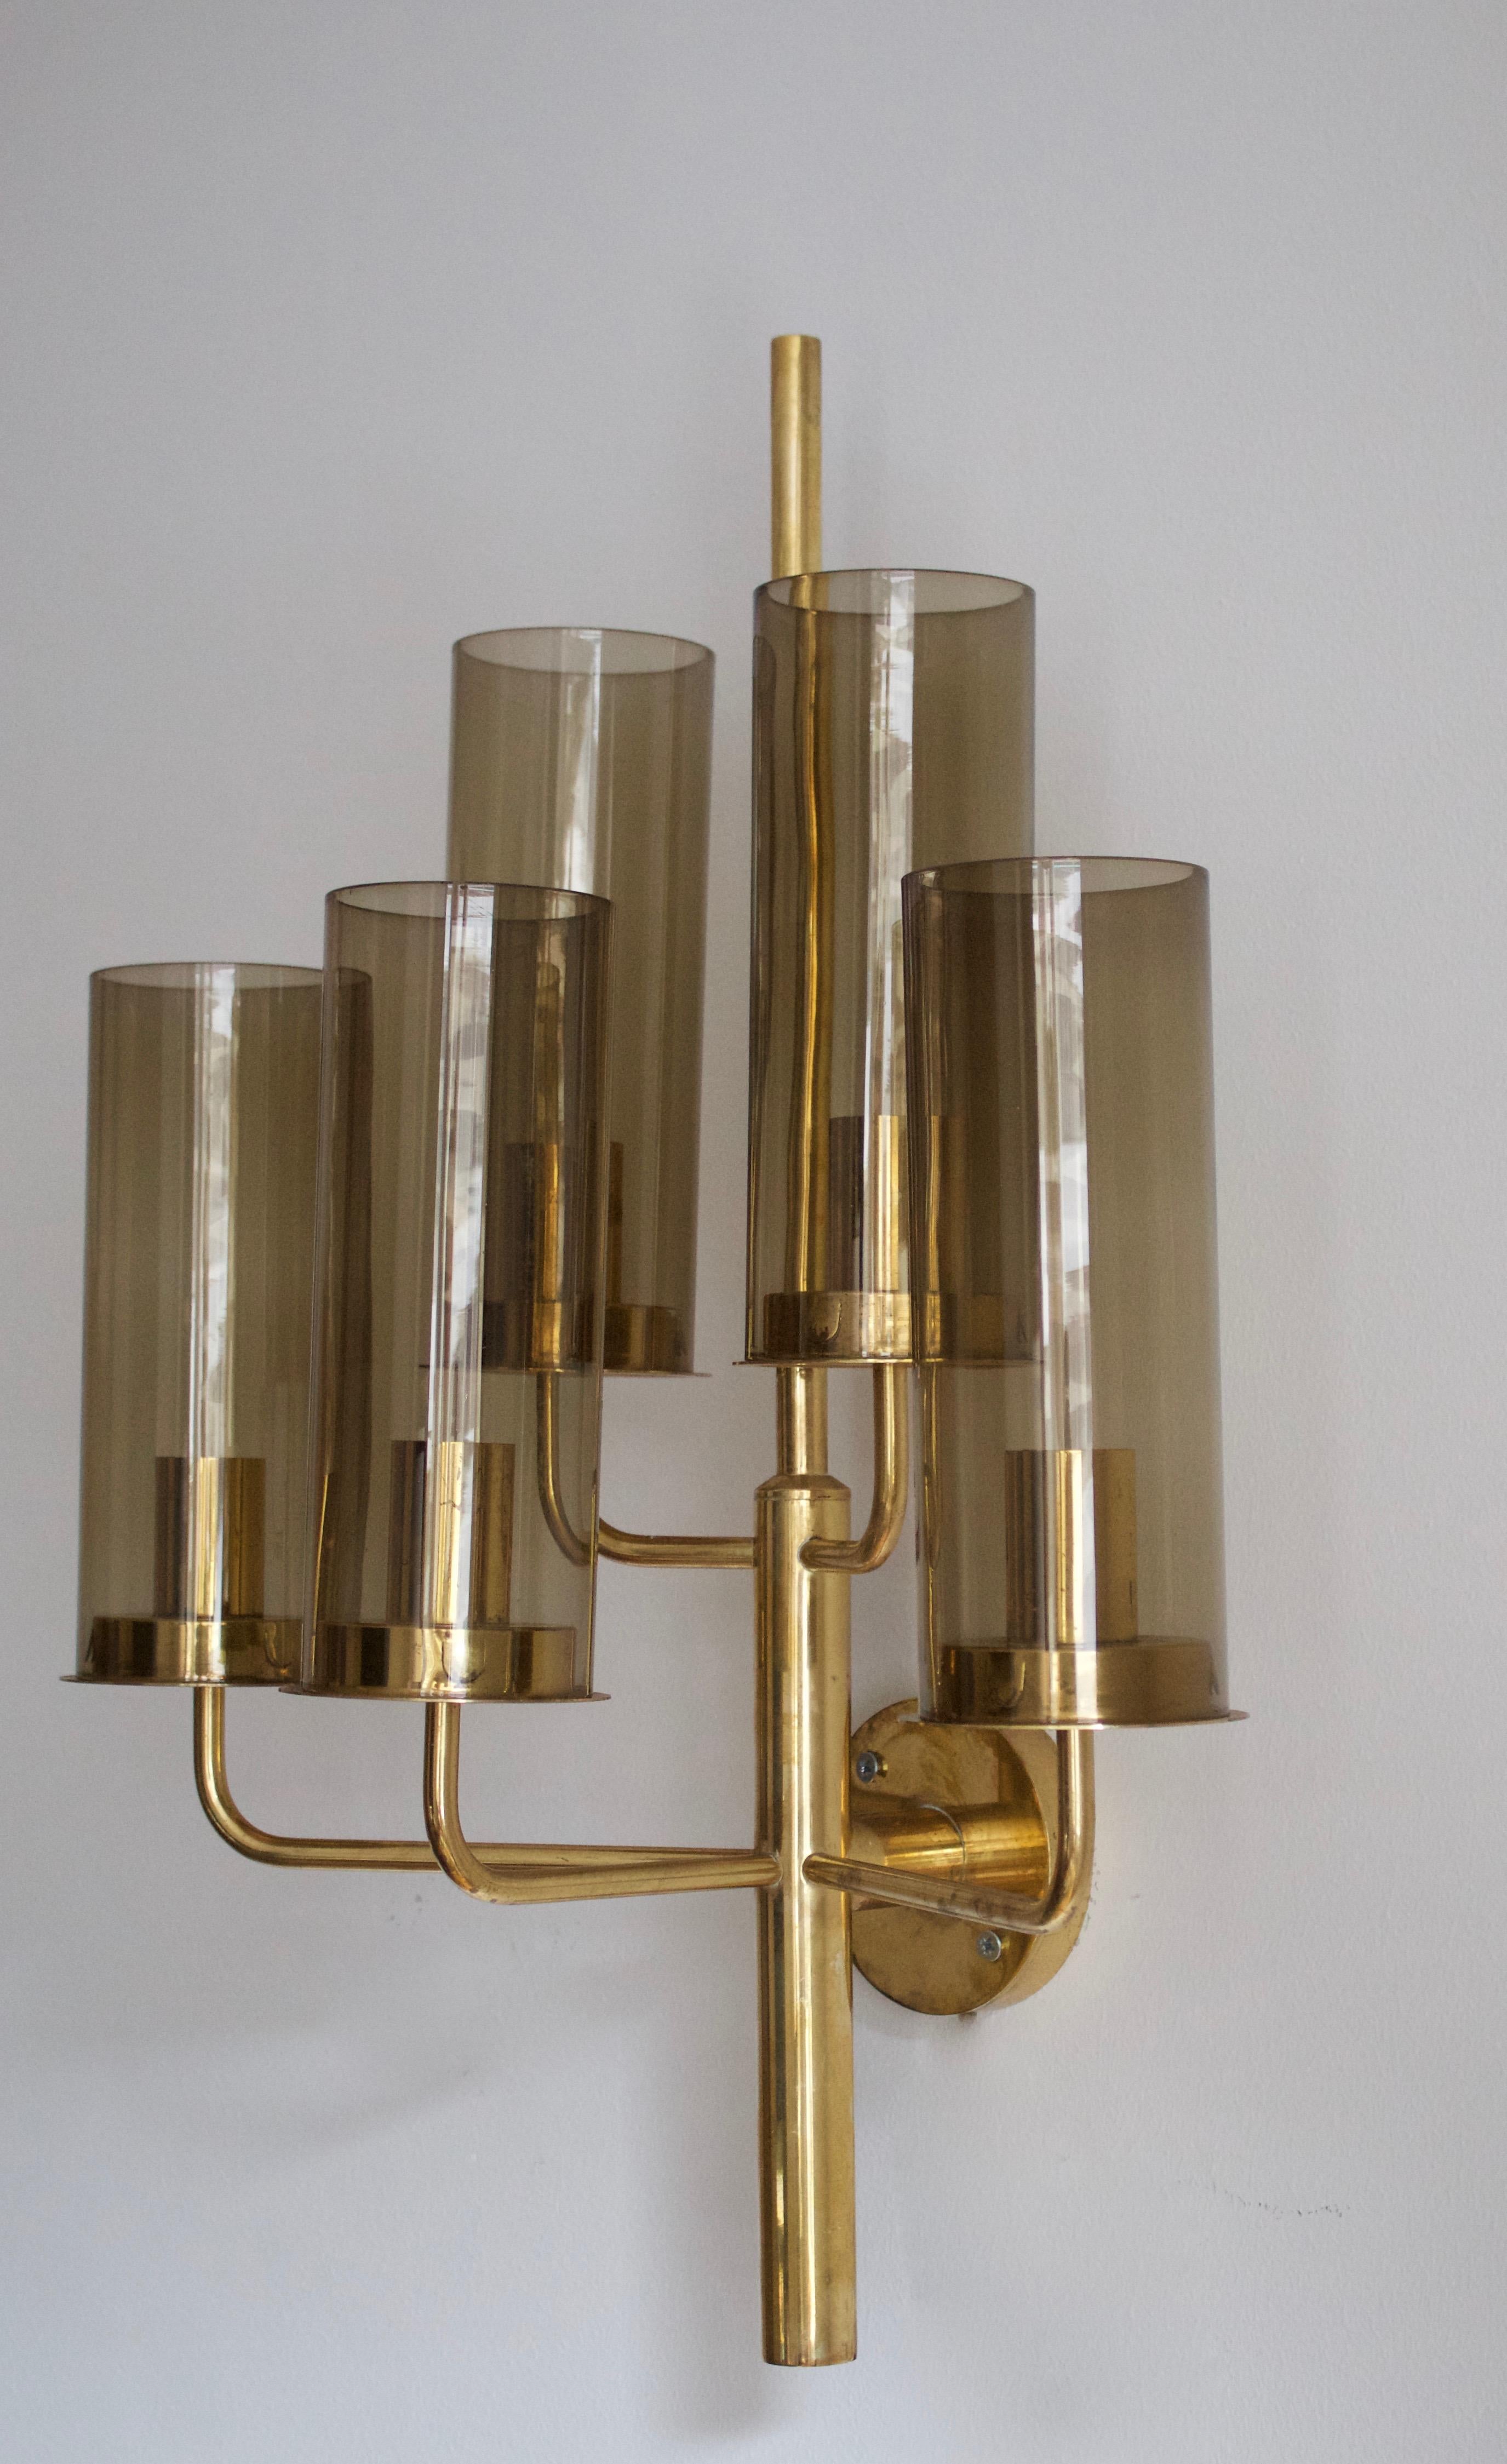 Hans-Agne Jakobsson, Sizable Wall Light, Brass, Glass, Sweden, c. 1960s In Good Condition For Sale In High Point, NC